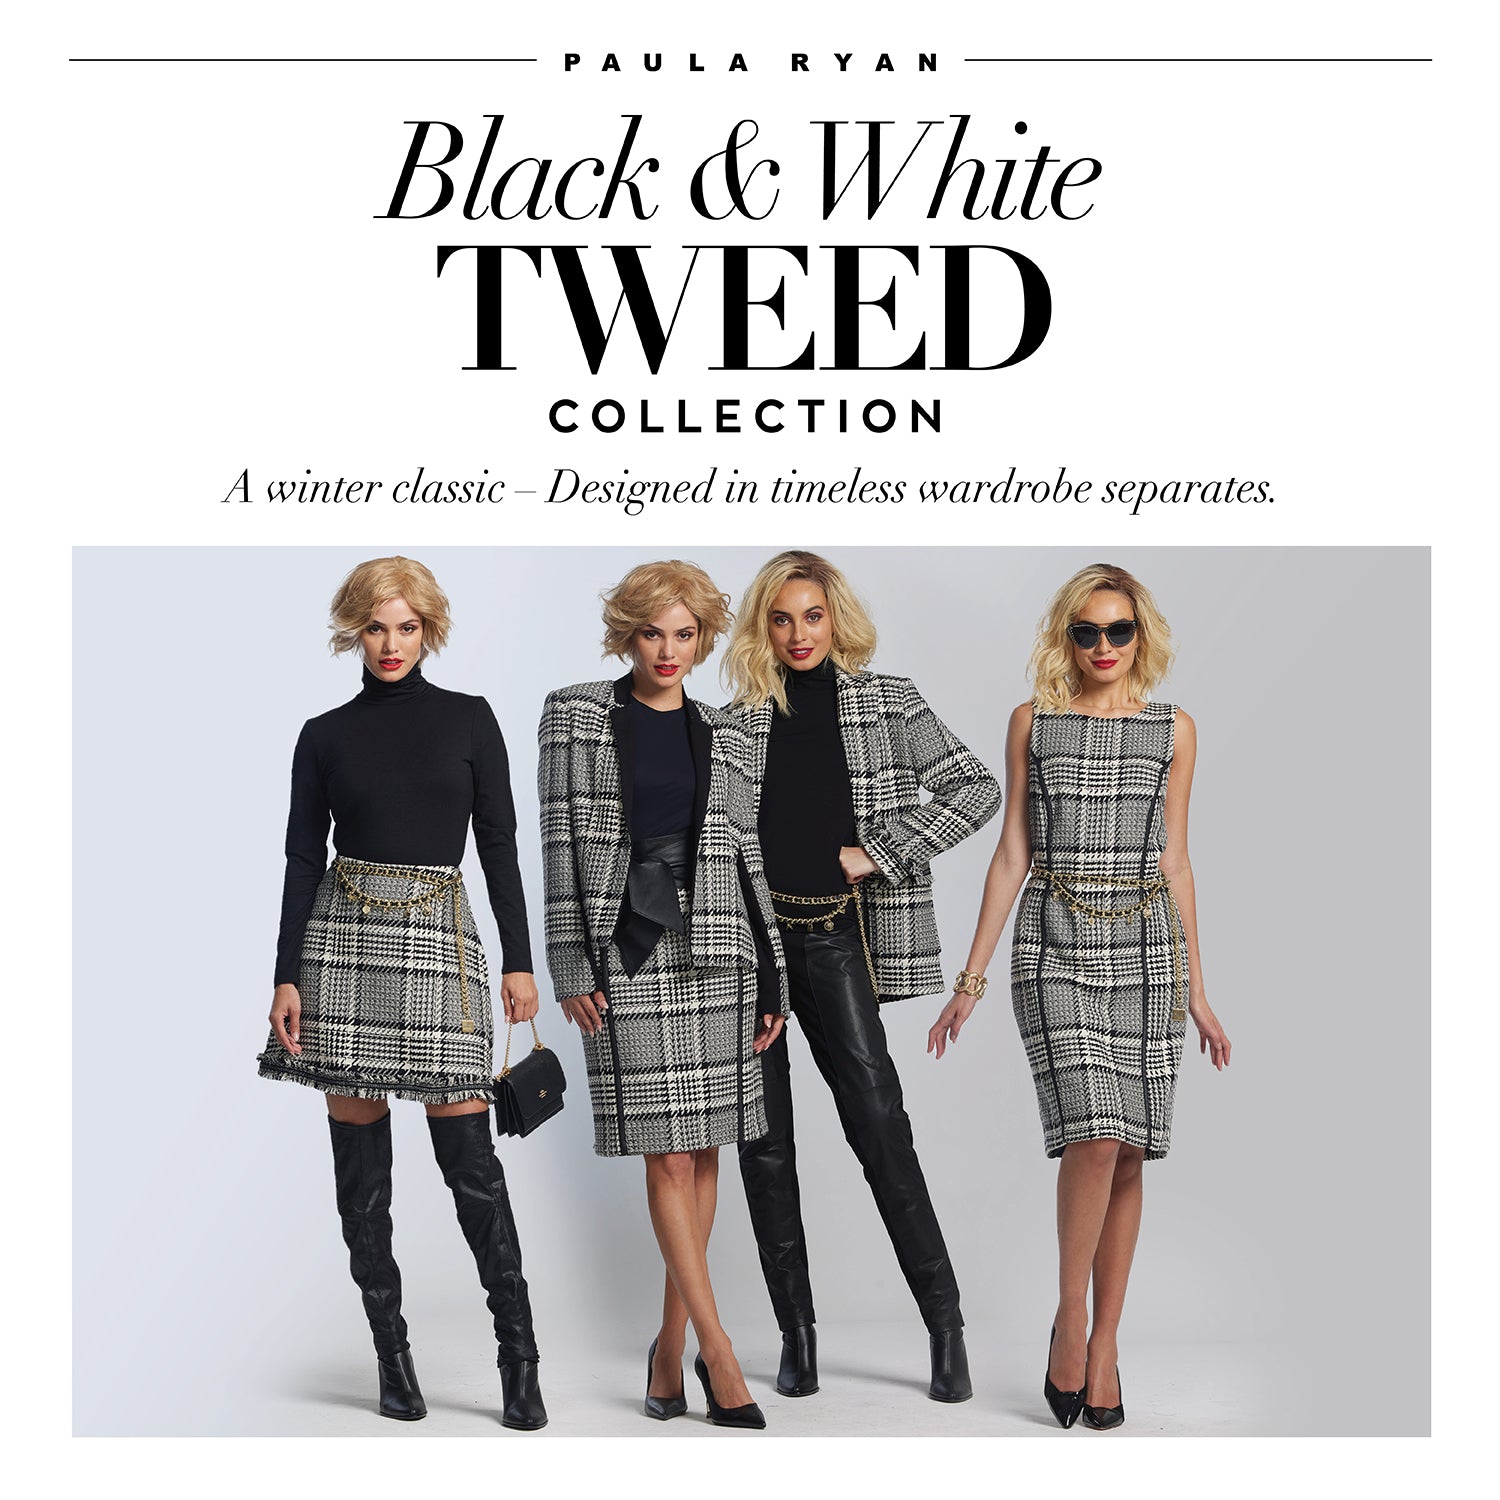 New from PAULA RYAN: Black & White Tweed Collection